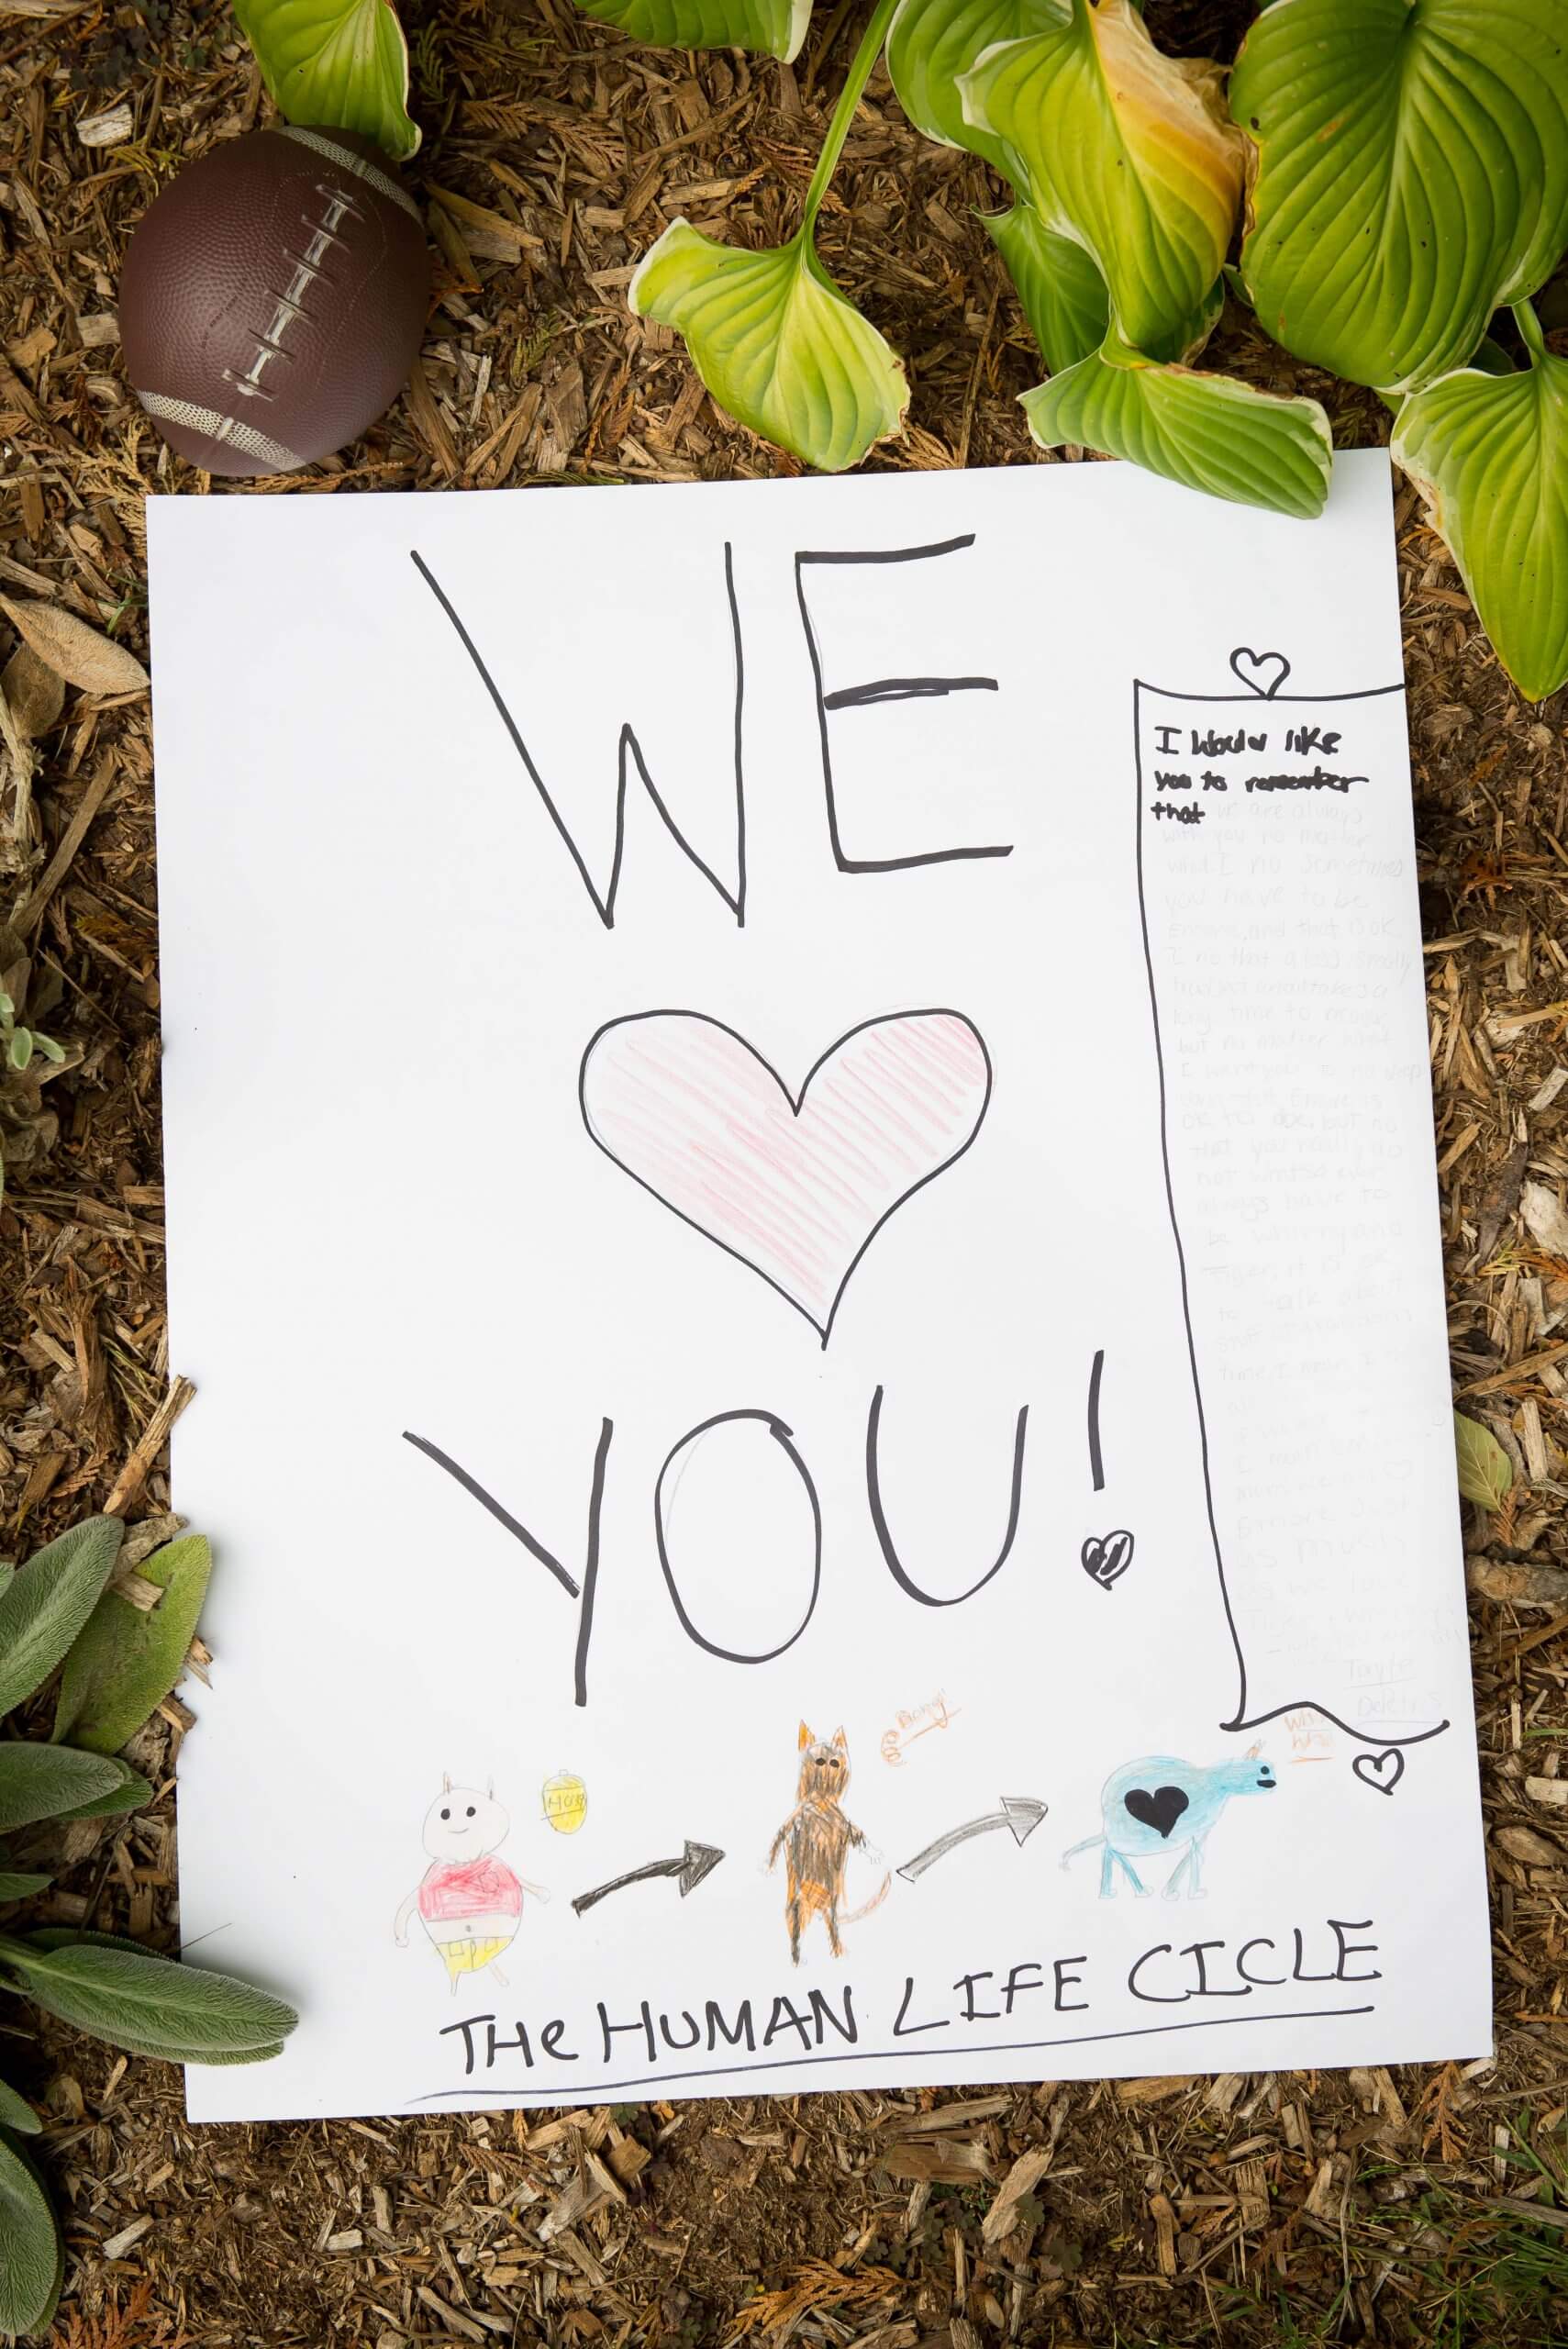 A child's hand written note reads, "We love you!" followed by drawings from left to right as follows: Piglet, right arrow, Tigger, right arrow, Eeyore. Below the drawing, text reads, "The human lifecycle."